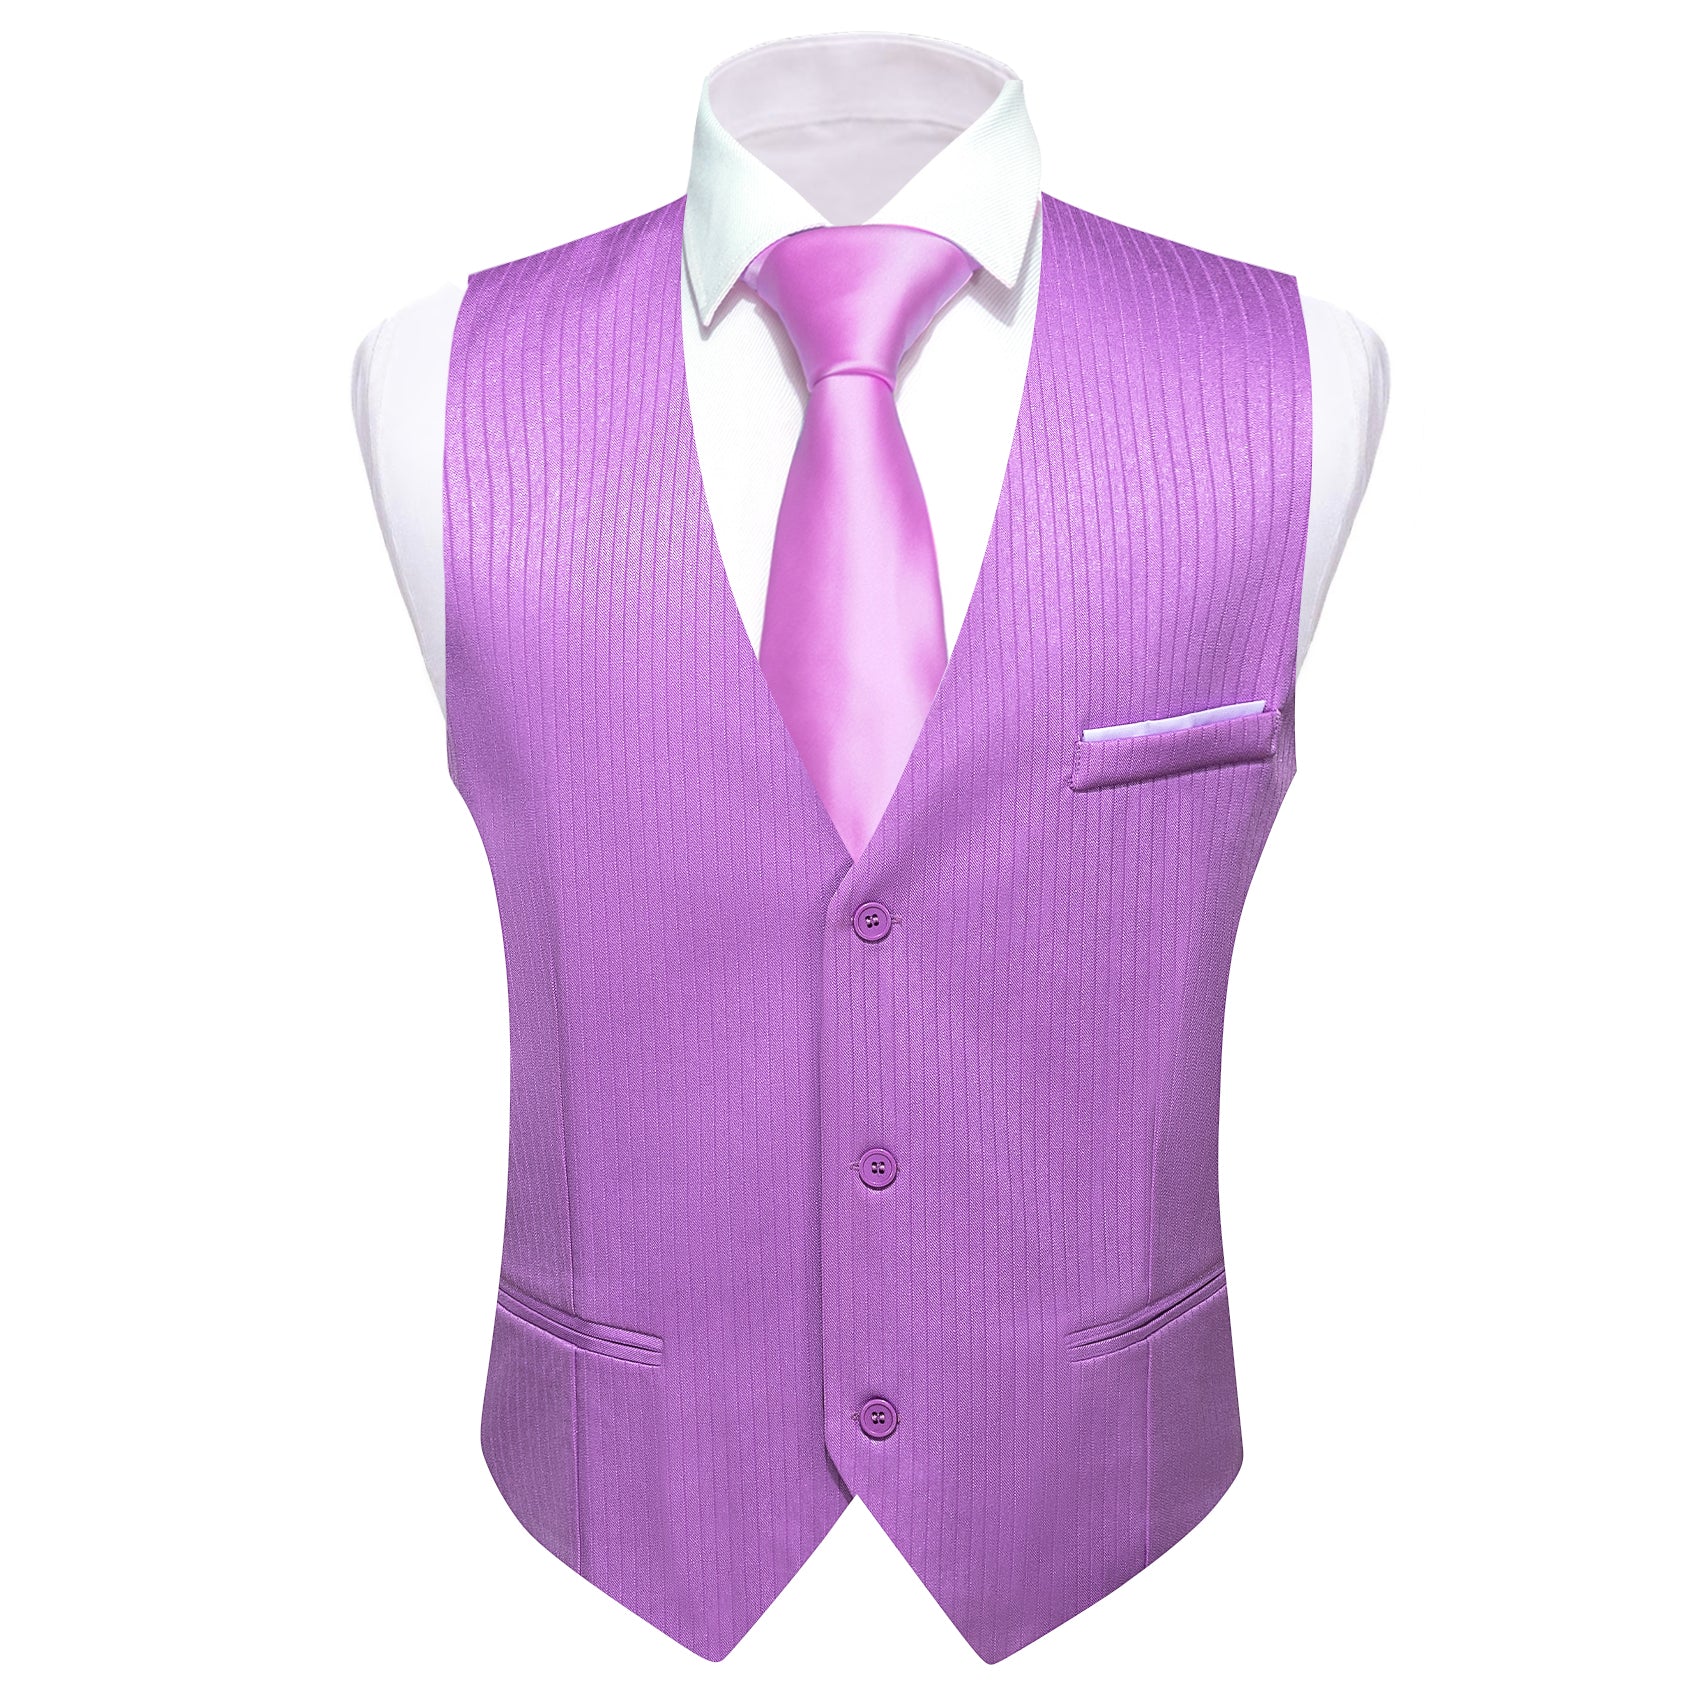 Barry.wang Peony Solid Business Vest Suit